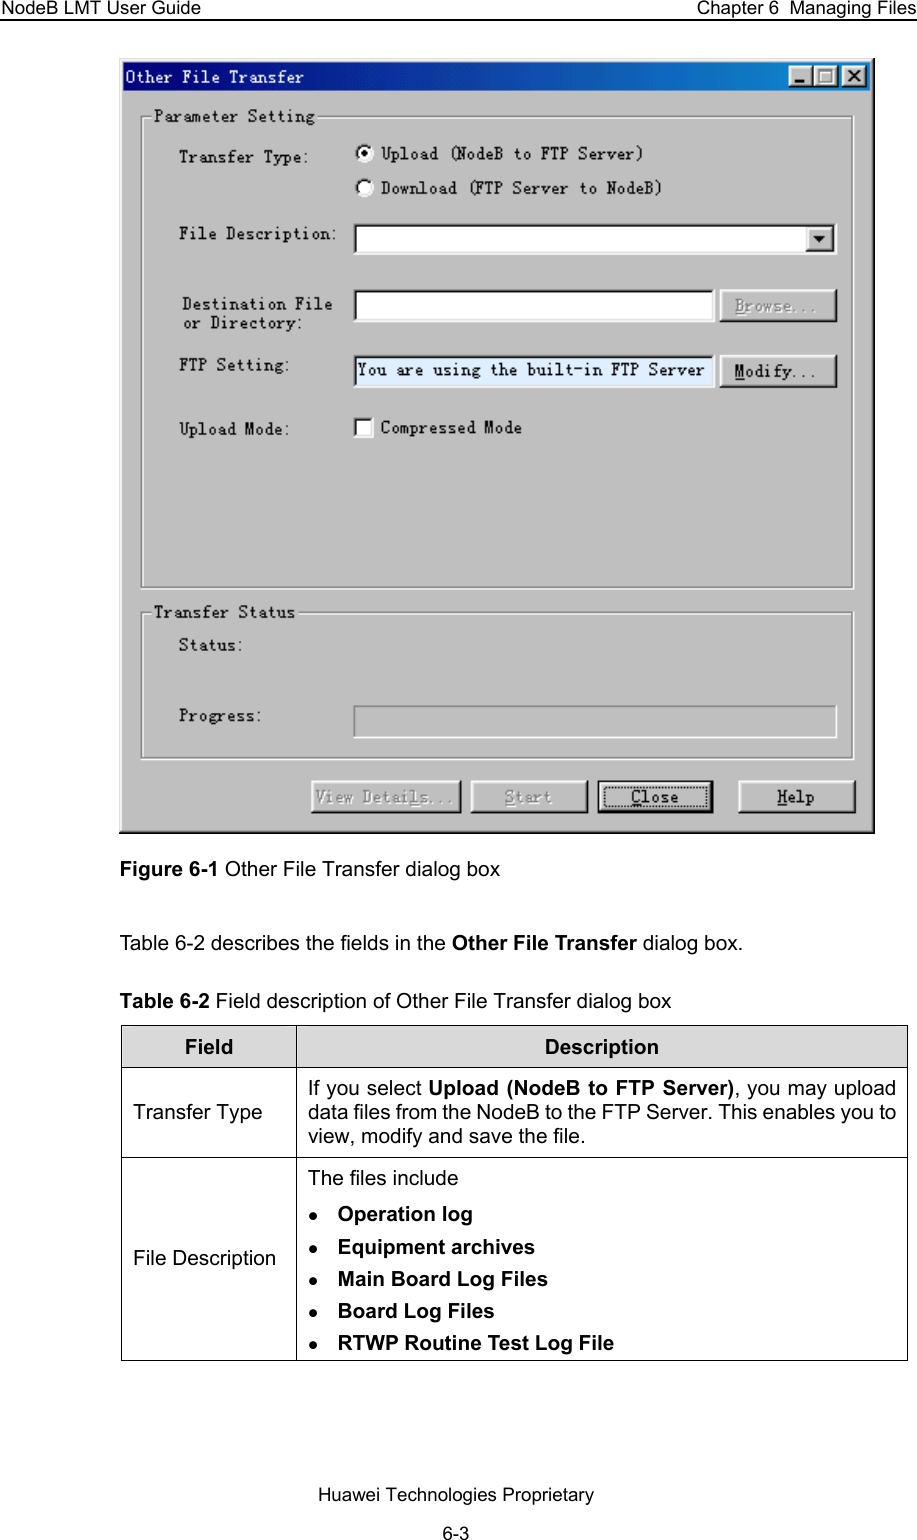 NodeB LMT User Guide  Chapter 6  Managing Files  Figure 6-1 Other File Transfer dialog box Table 6-2 describes the fields in the Other File Transfer dialog box.  Table 6-2 Field description of Other File Transfer dialog box  Field   Description  Transfer Type  If you select Upload (NodeB to FTP Server), you may upload data files from the NodeB to the FTP Server. This enables you to view, modify and save the file. File Description  The files include  z Operation log  z Equipment archives  z Main Board Log Files  z Board Log Files  z RTWP Routine Test Log File Huawei Technologies Proprietary 6-3 